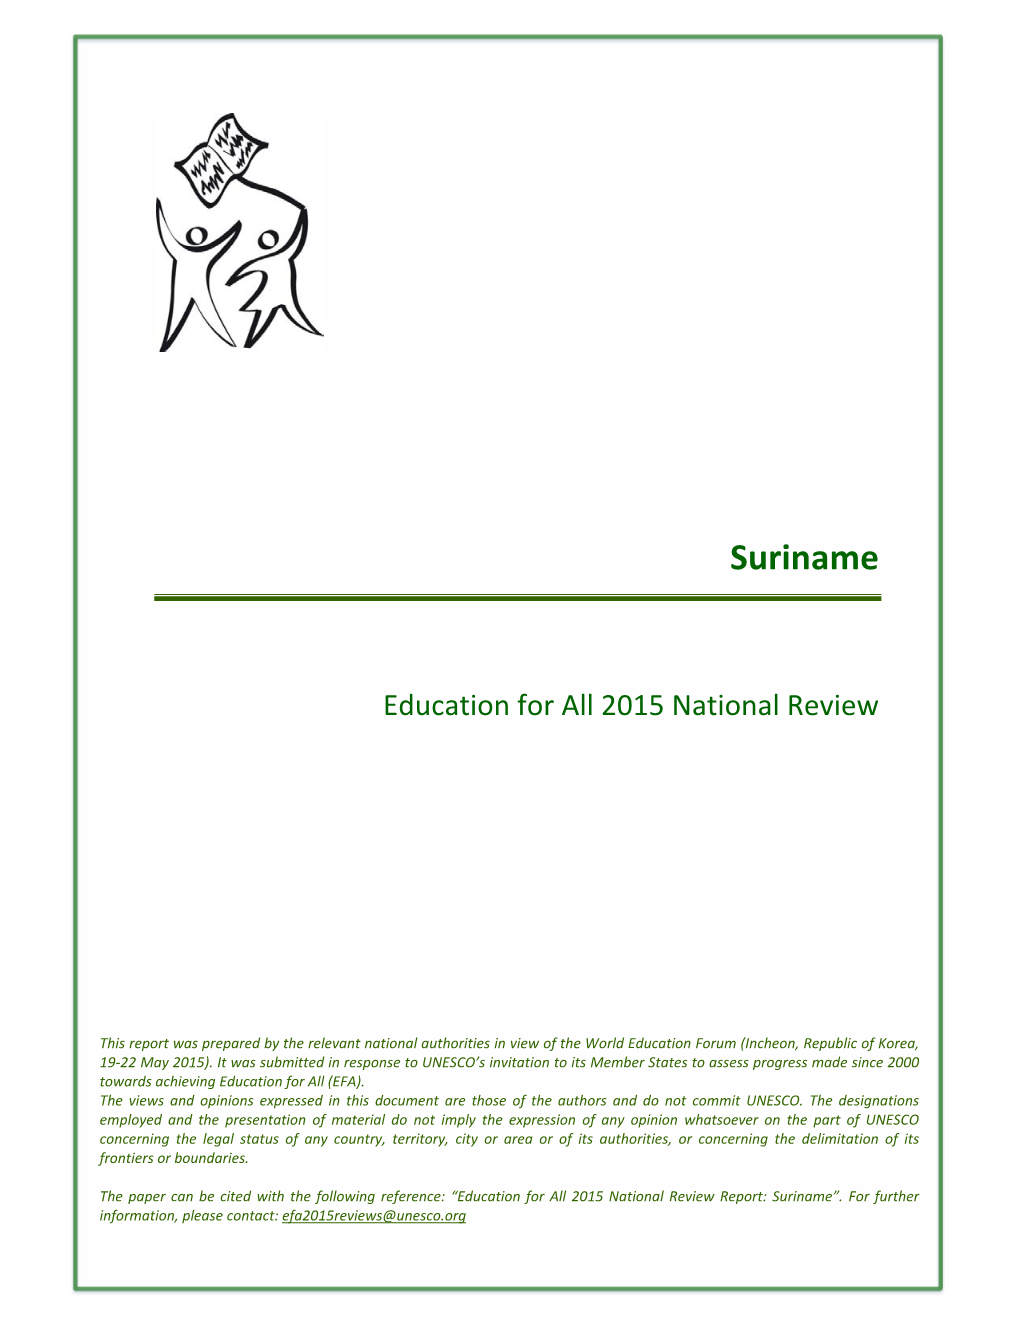 Suriname Education for All Report, 2010-2013; 2014